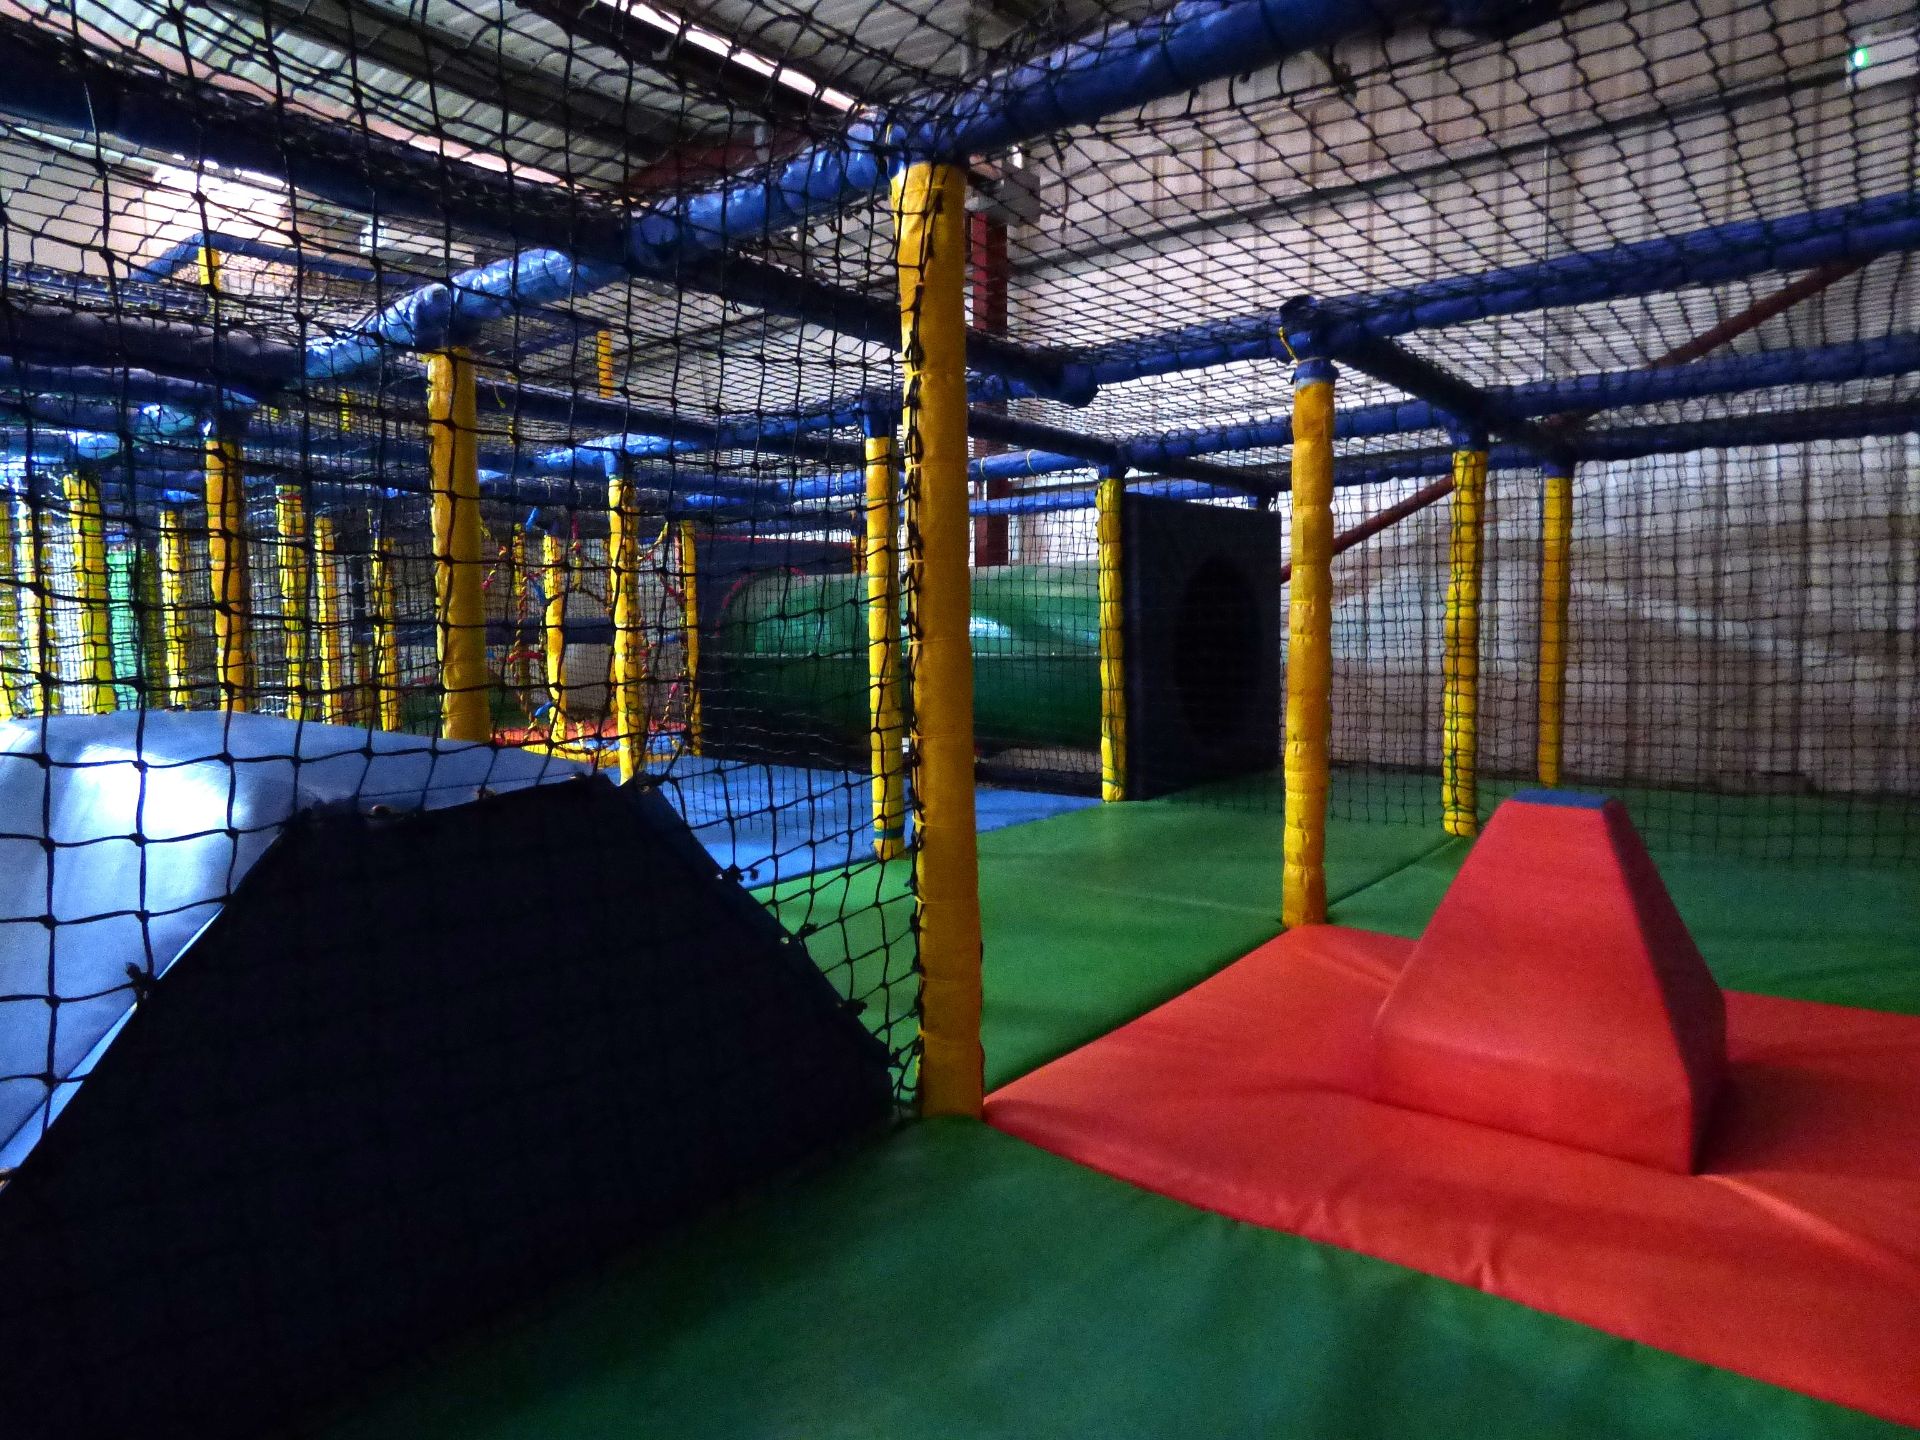 Over 4s Soft Play Adventure Area - Image 12 of 17